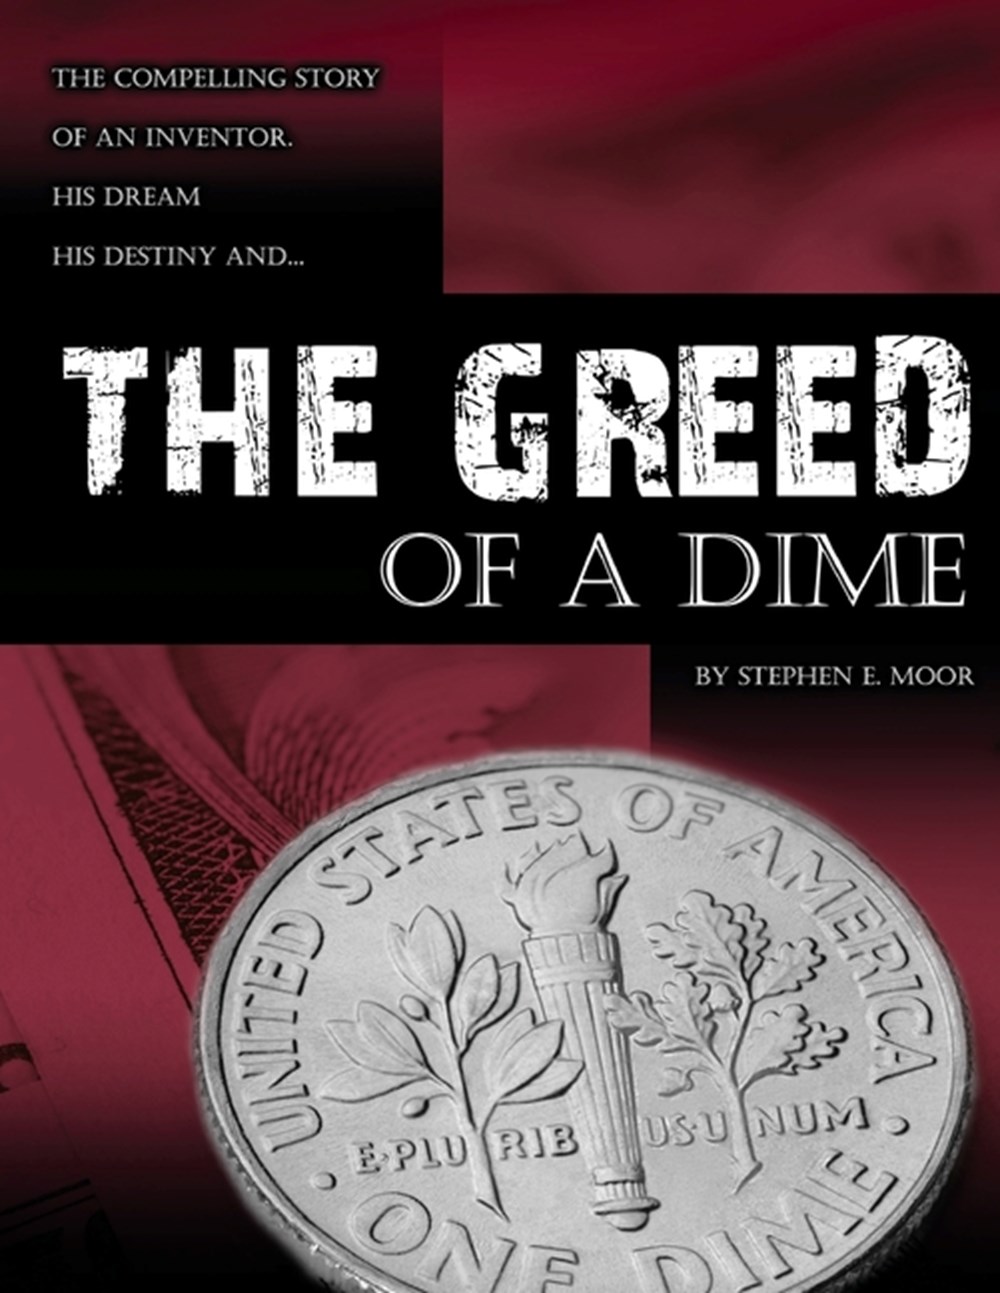 Greed of a Dime: The Compelling Story of an Inventor, His Dream His Destiny (Revised Soft Cover)